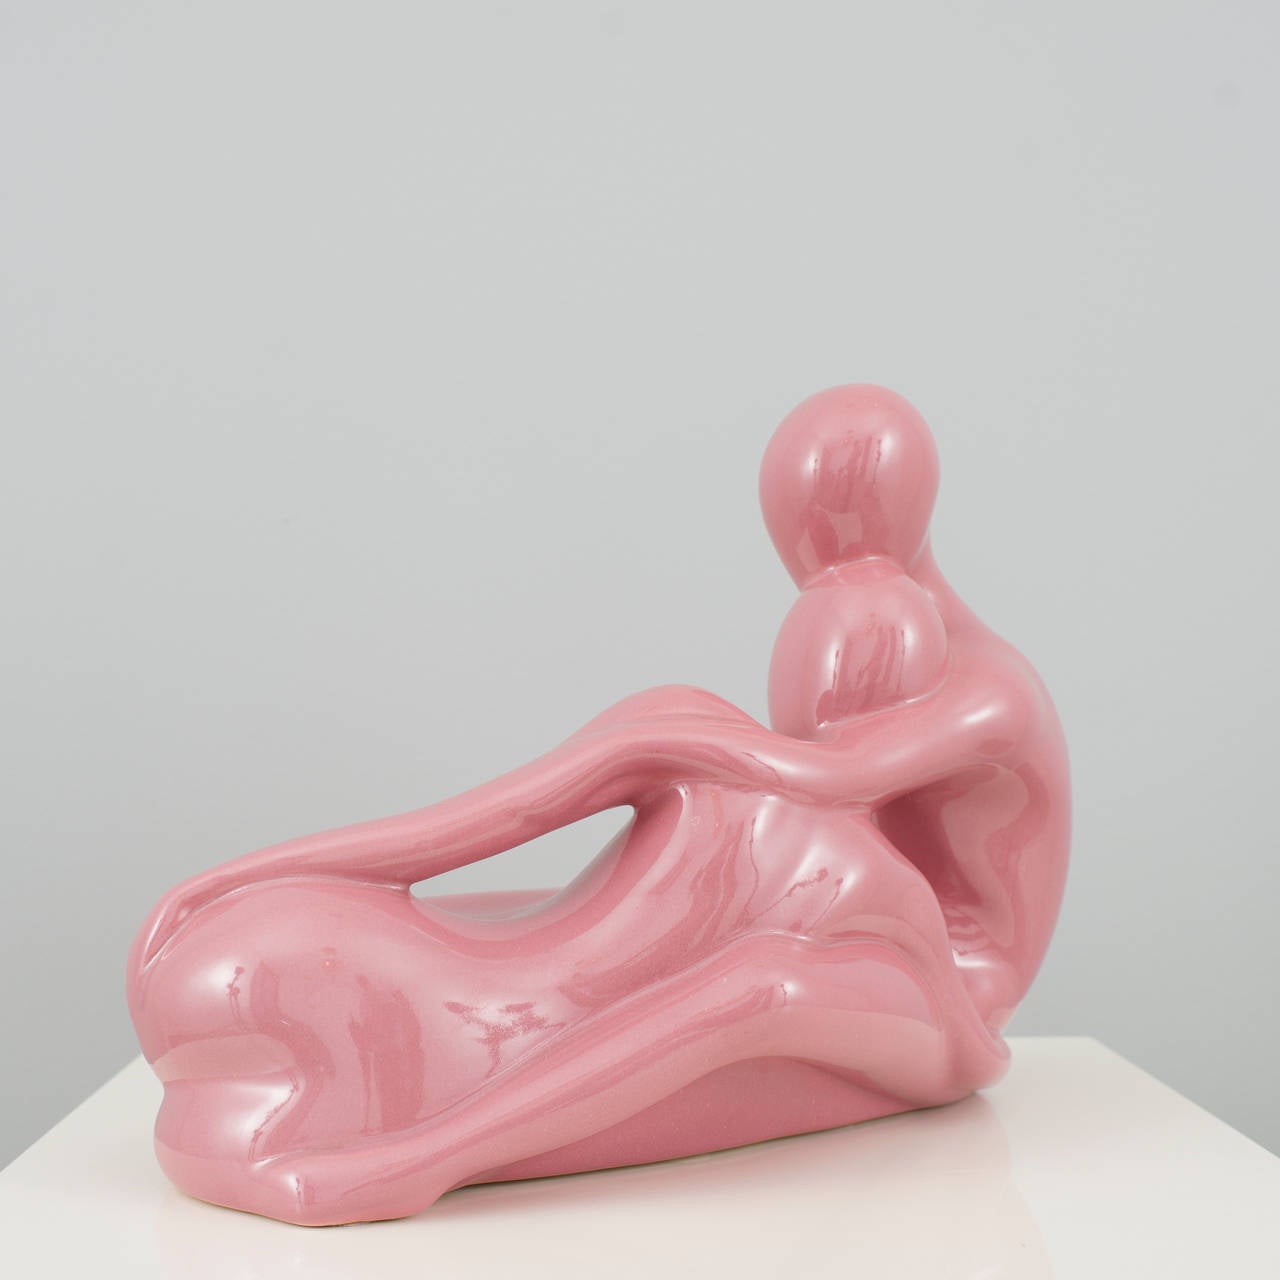 Very cool art deco statue made by Jaru circa 1983. Depicts a male and female nude couple in a loving embrace. The finish is high gloss ceramic in a bubble gum pink tone.